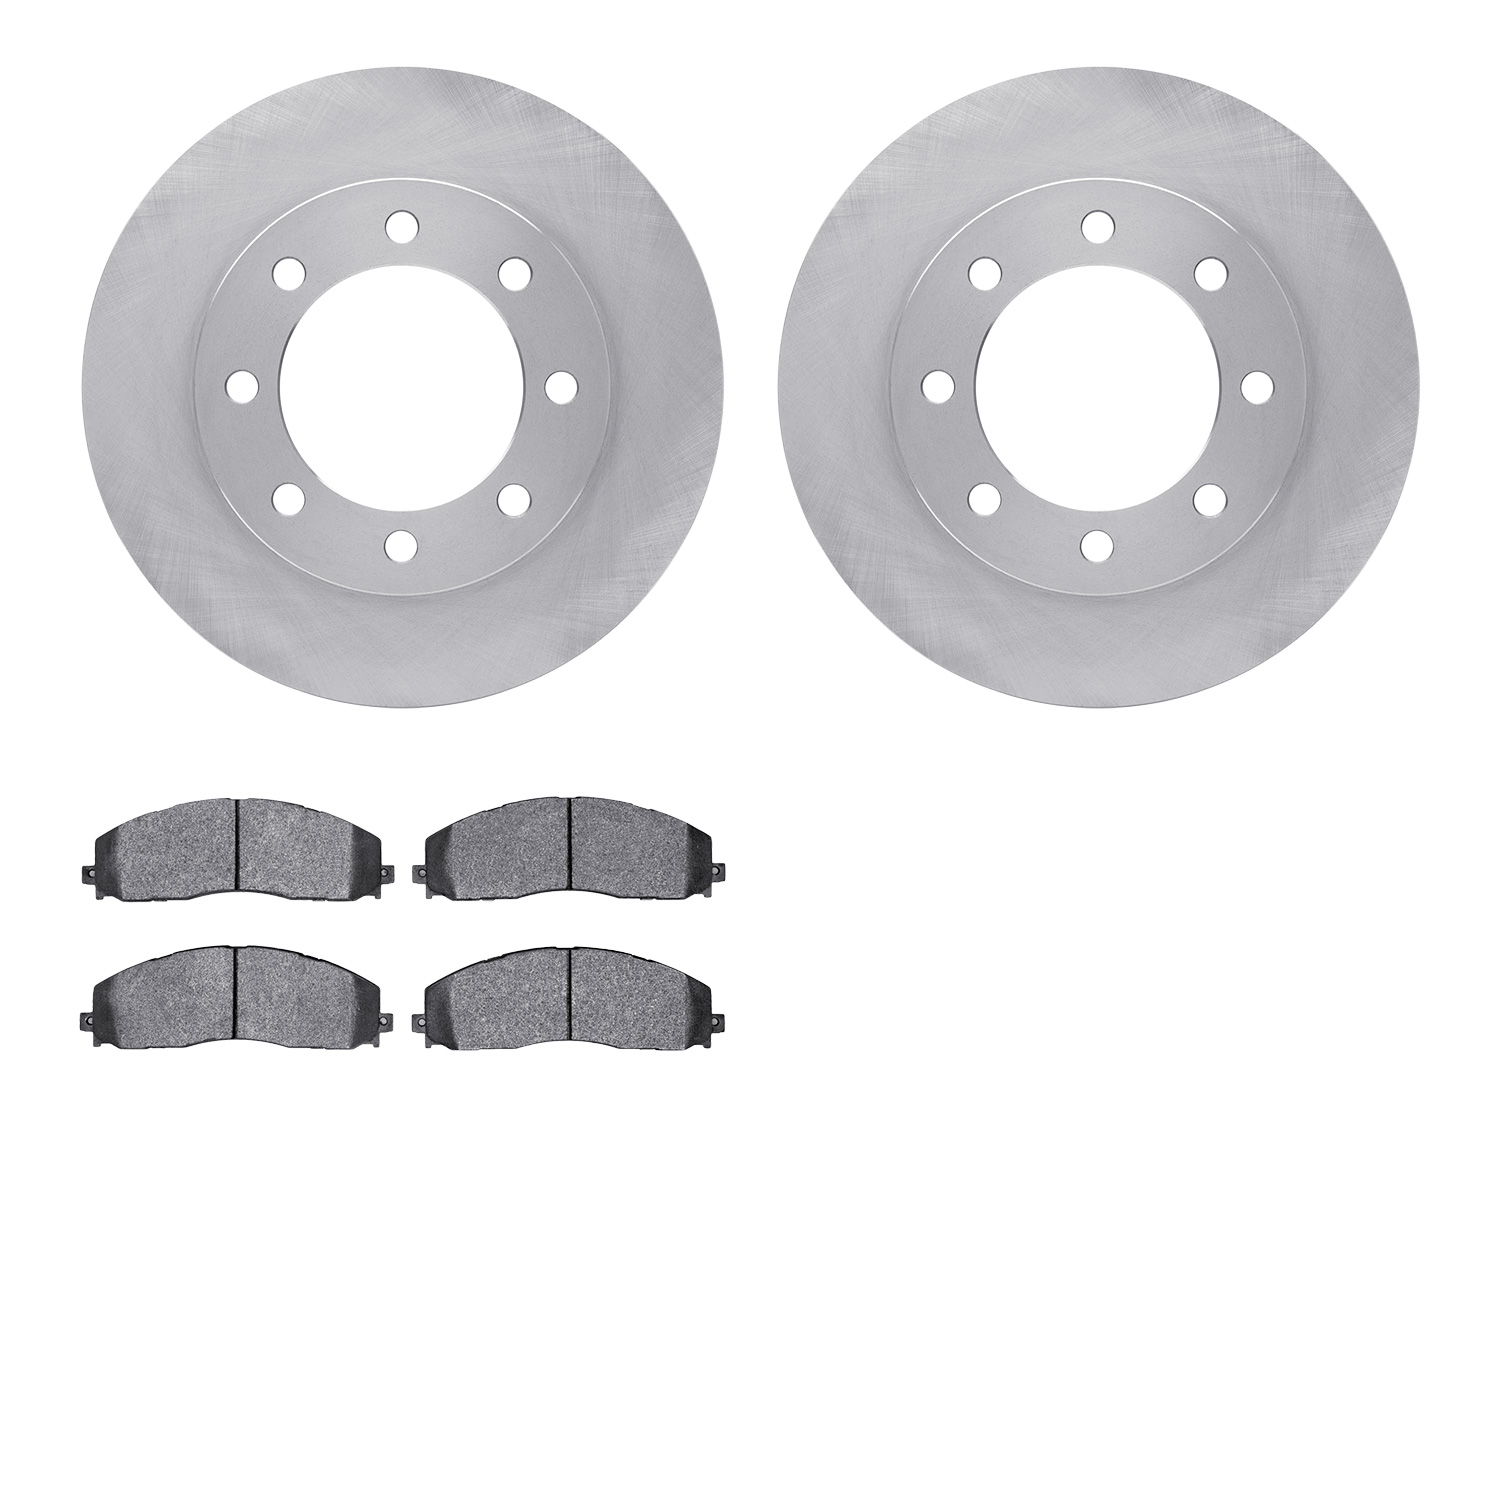 6202-99675 Brake Rotors w/Heavy-Duty Brake Pads Kit, Fits Select Ford/Lincoln/Mercury/Mazda, Position: Front